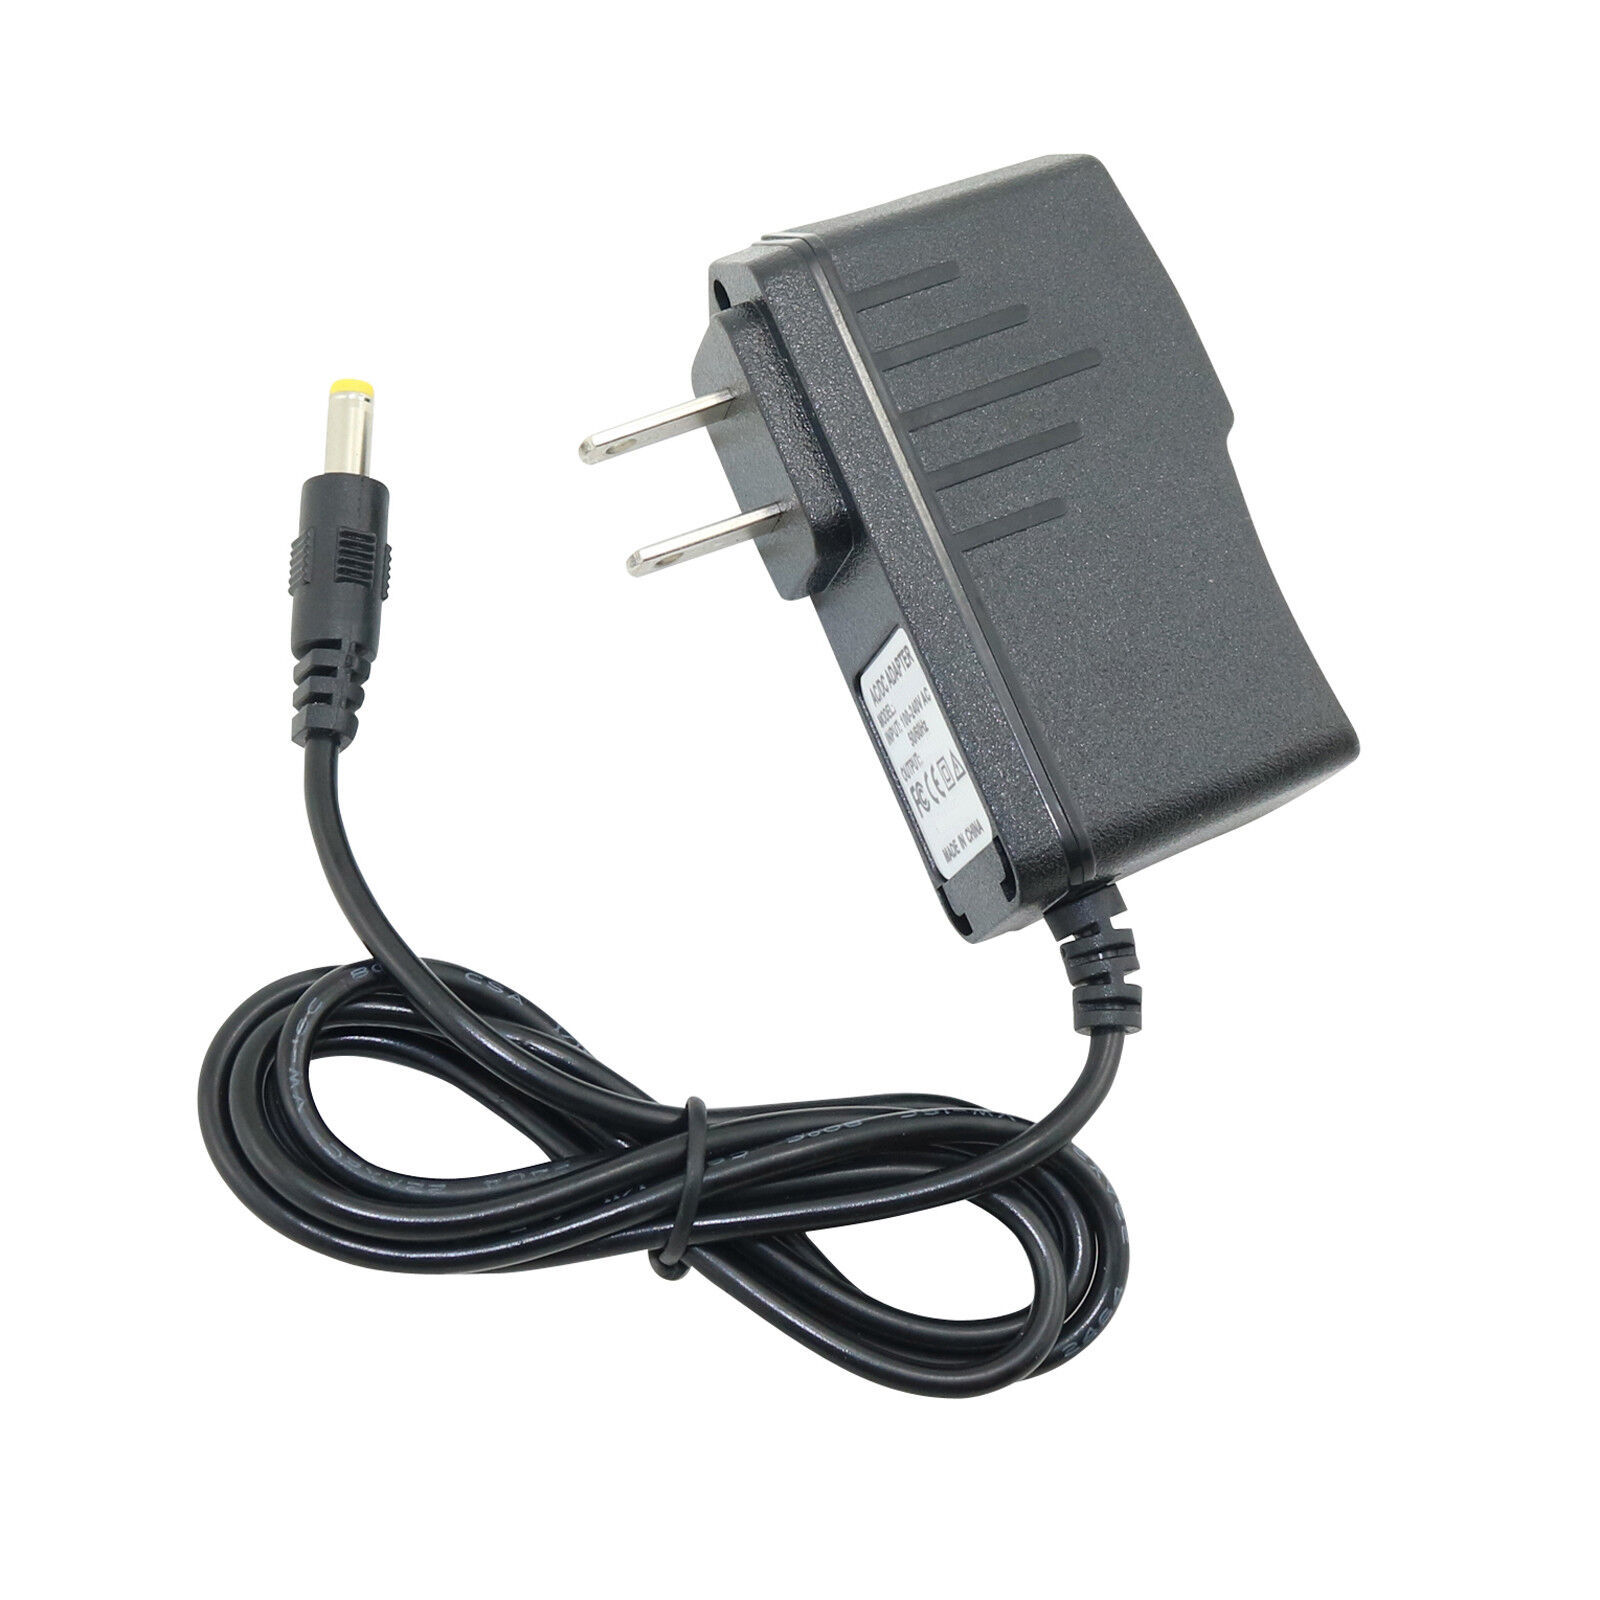 Primary image for Ac Adapter Power Supply Cord For Tascam Mf-P01 Mfp01 Analog Multi Track Recorder